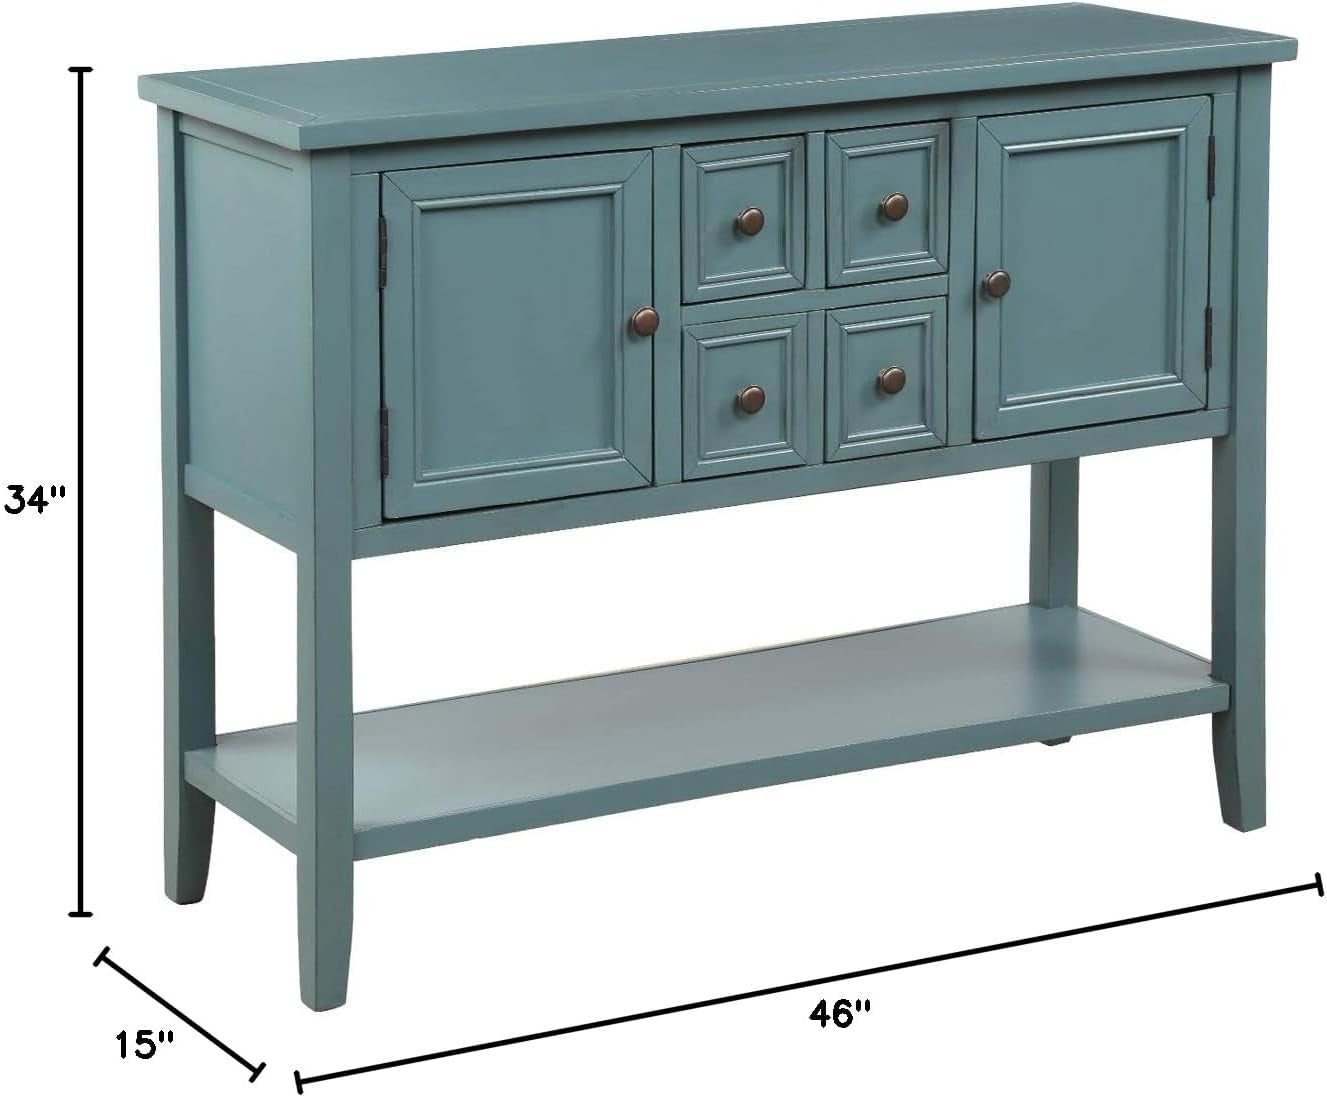 Console Table Sideboard with Storage Drawers and Bottom Shelf for Living Room, Kitchen, Entryway/Hallway, Dark Blue - LynkHouse